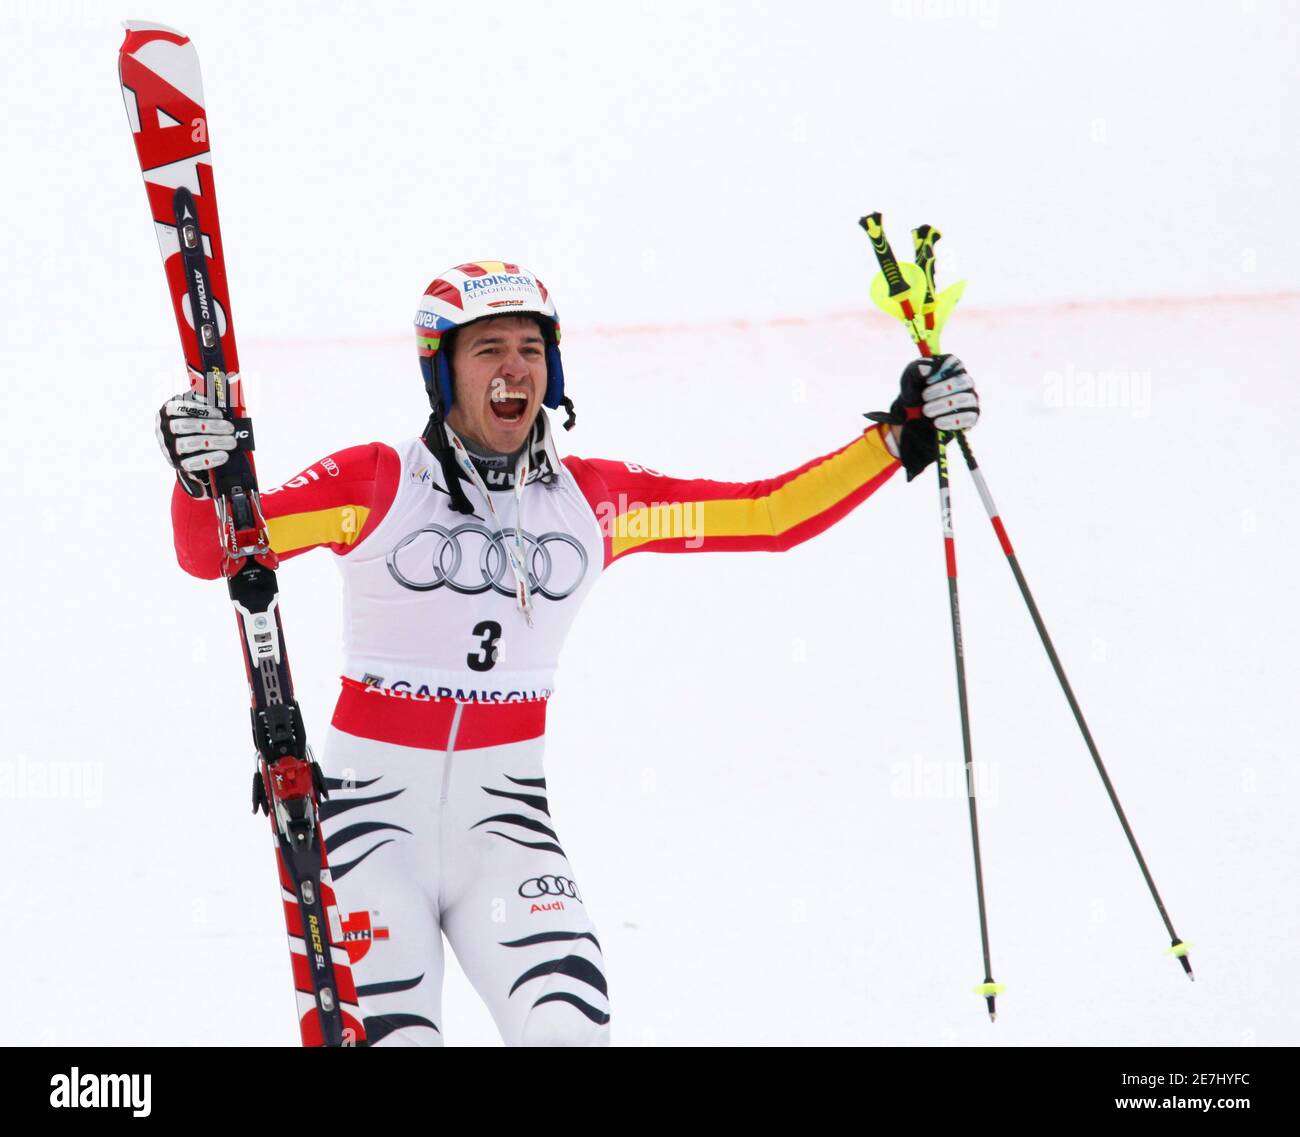 Felix Neureuther of Germany celebrates winning the men's Alpine Skiing World Cup Slalom in Garmisch-Partenkirchen March 13, 2010.  REUTERS/Wolfgang Rattay (GERMANY - Tags: SPORT SKIING) Stock Photo